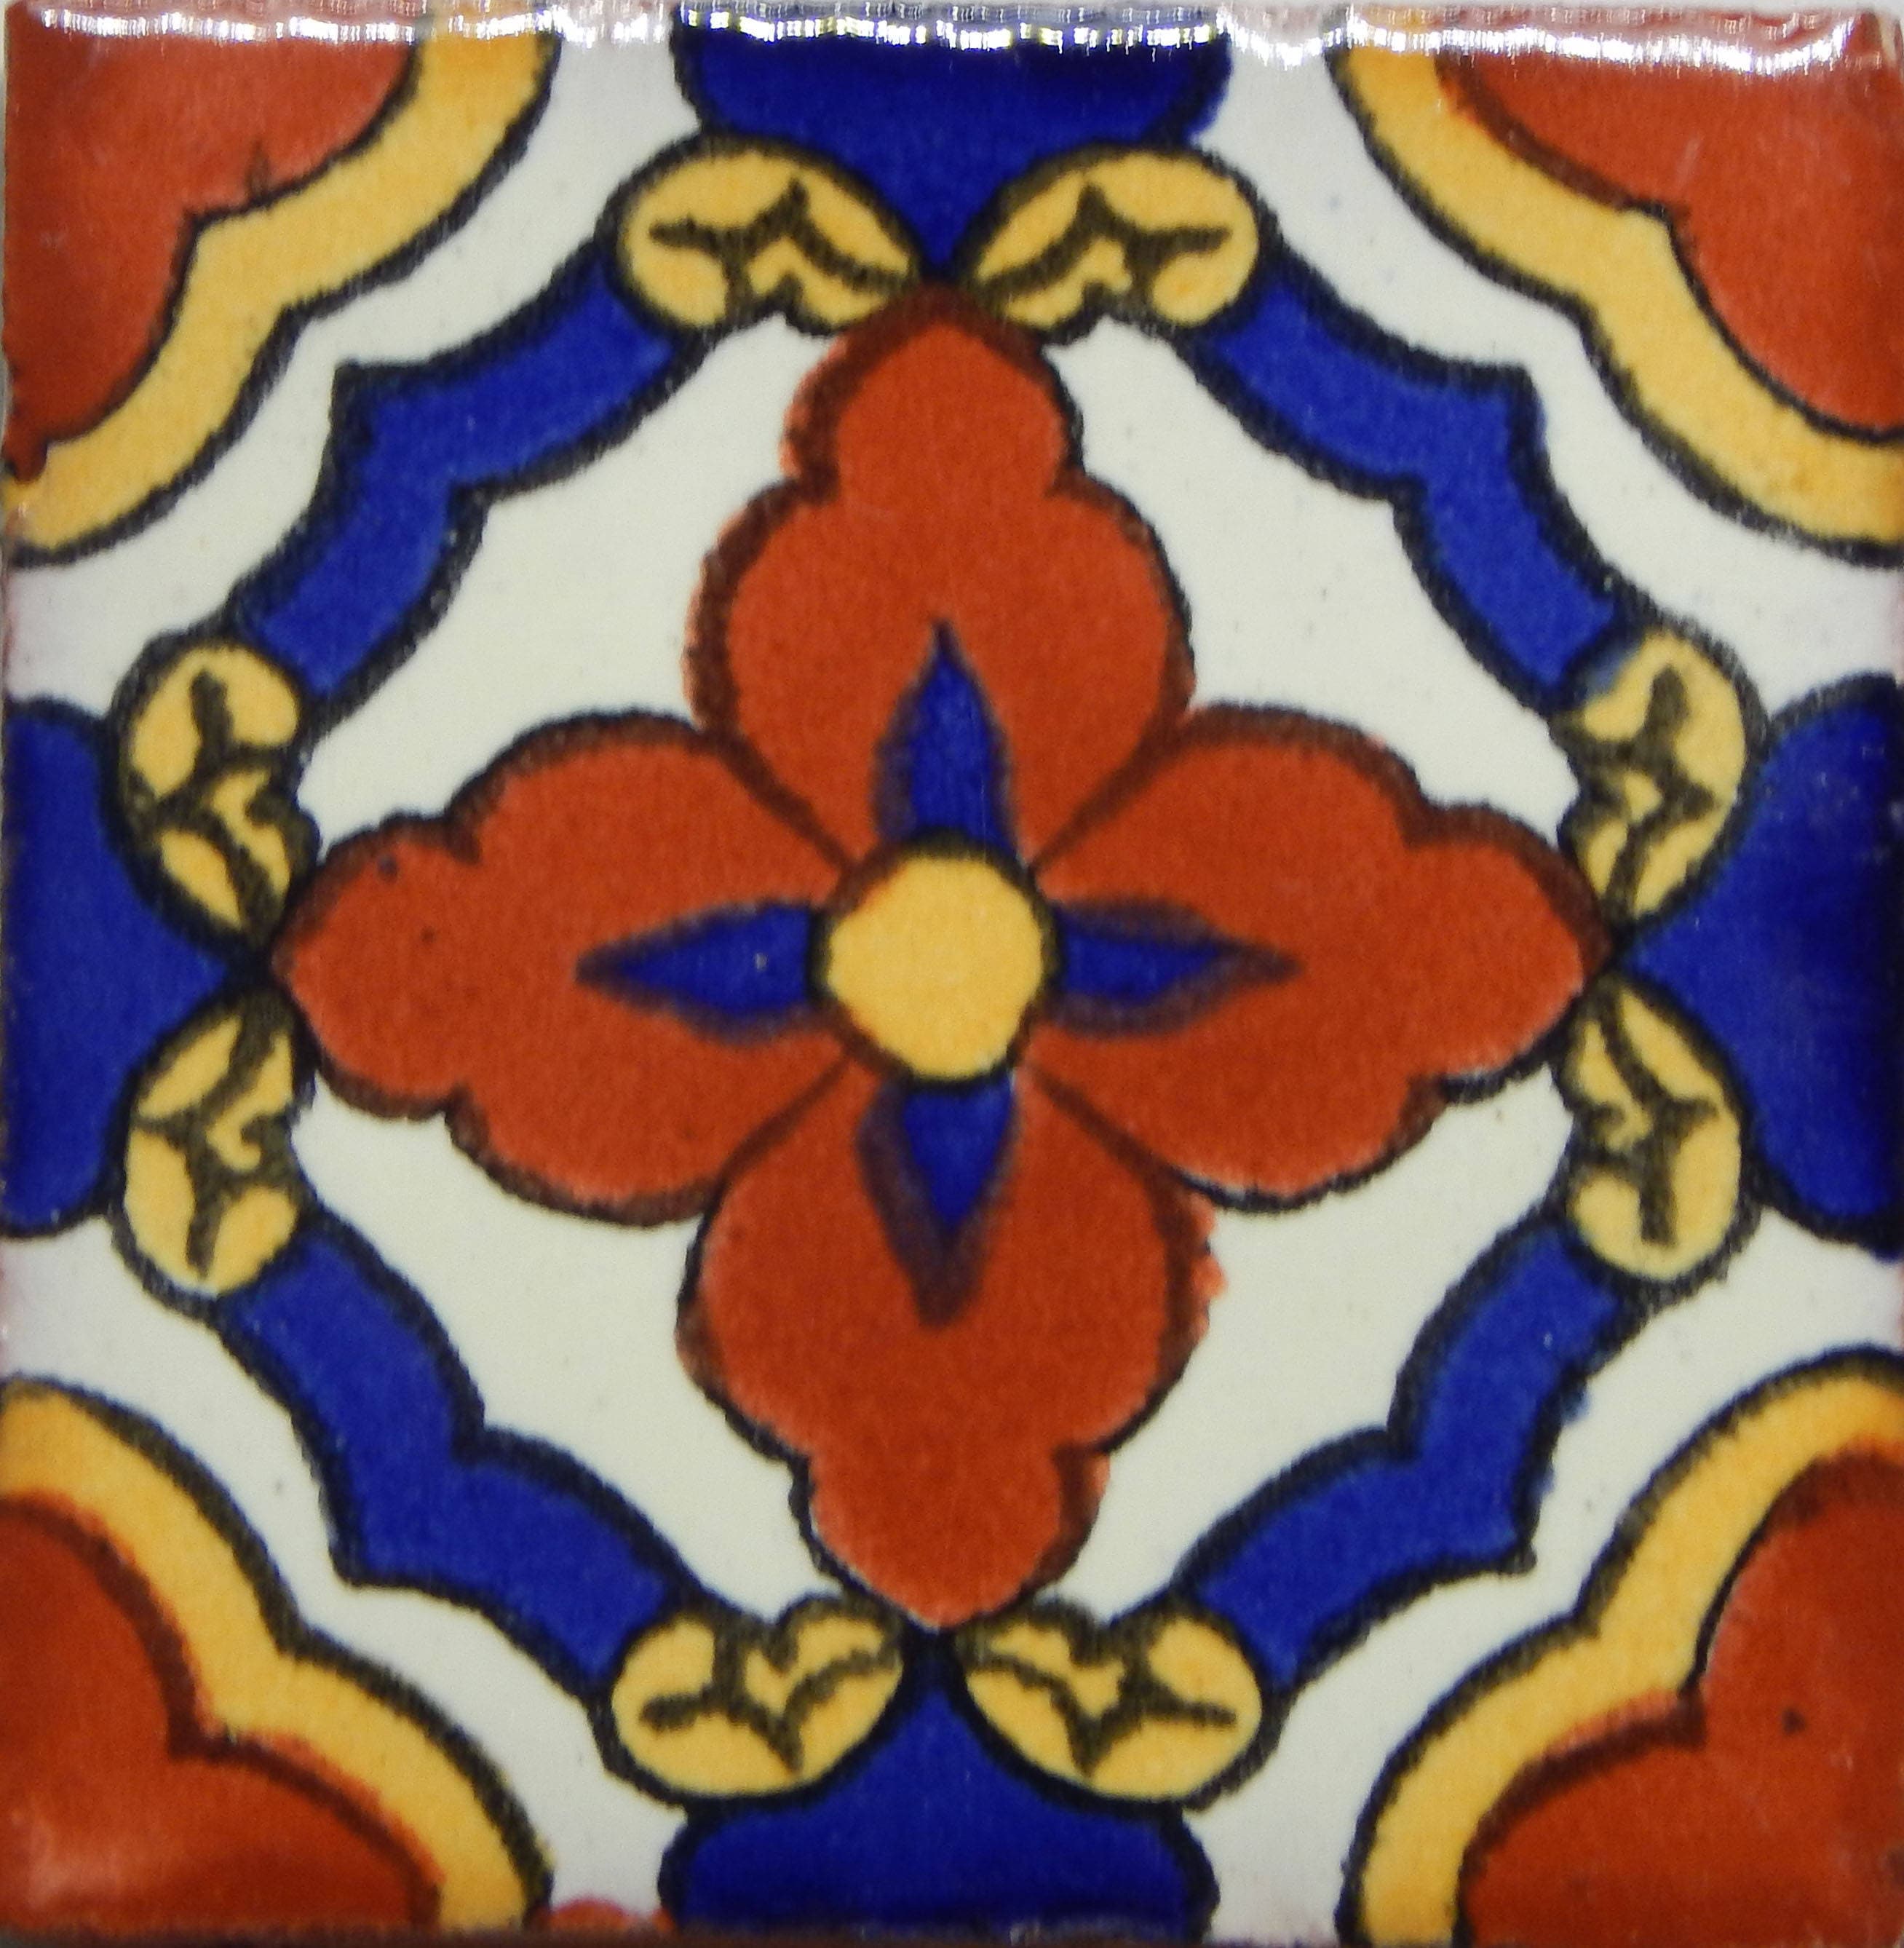 Buy 50 Pcs Talavera Mexican Hand Painted Tile Folk Art Tile 2X2 Online in  India Etsy